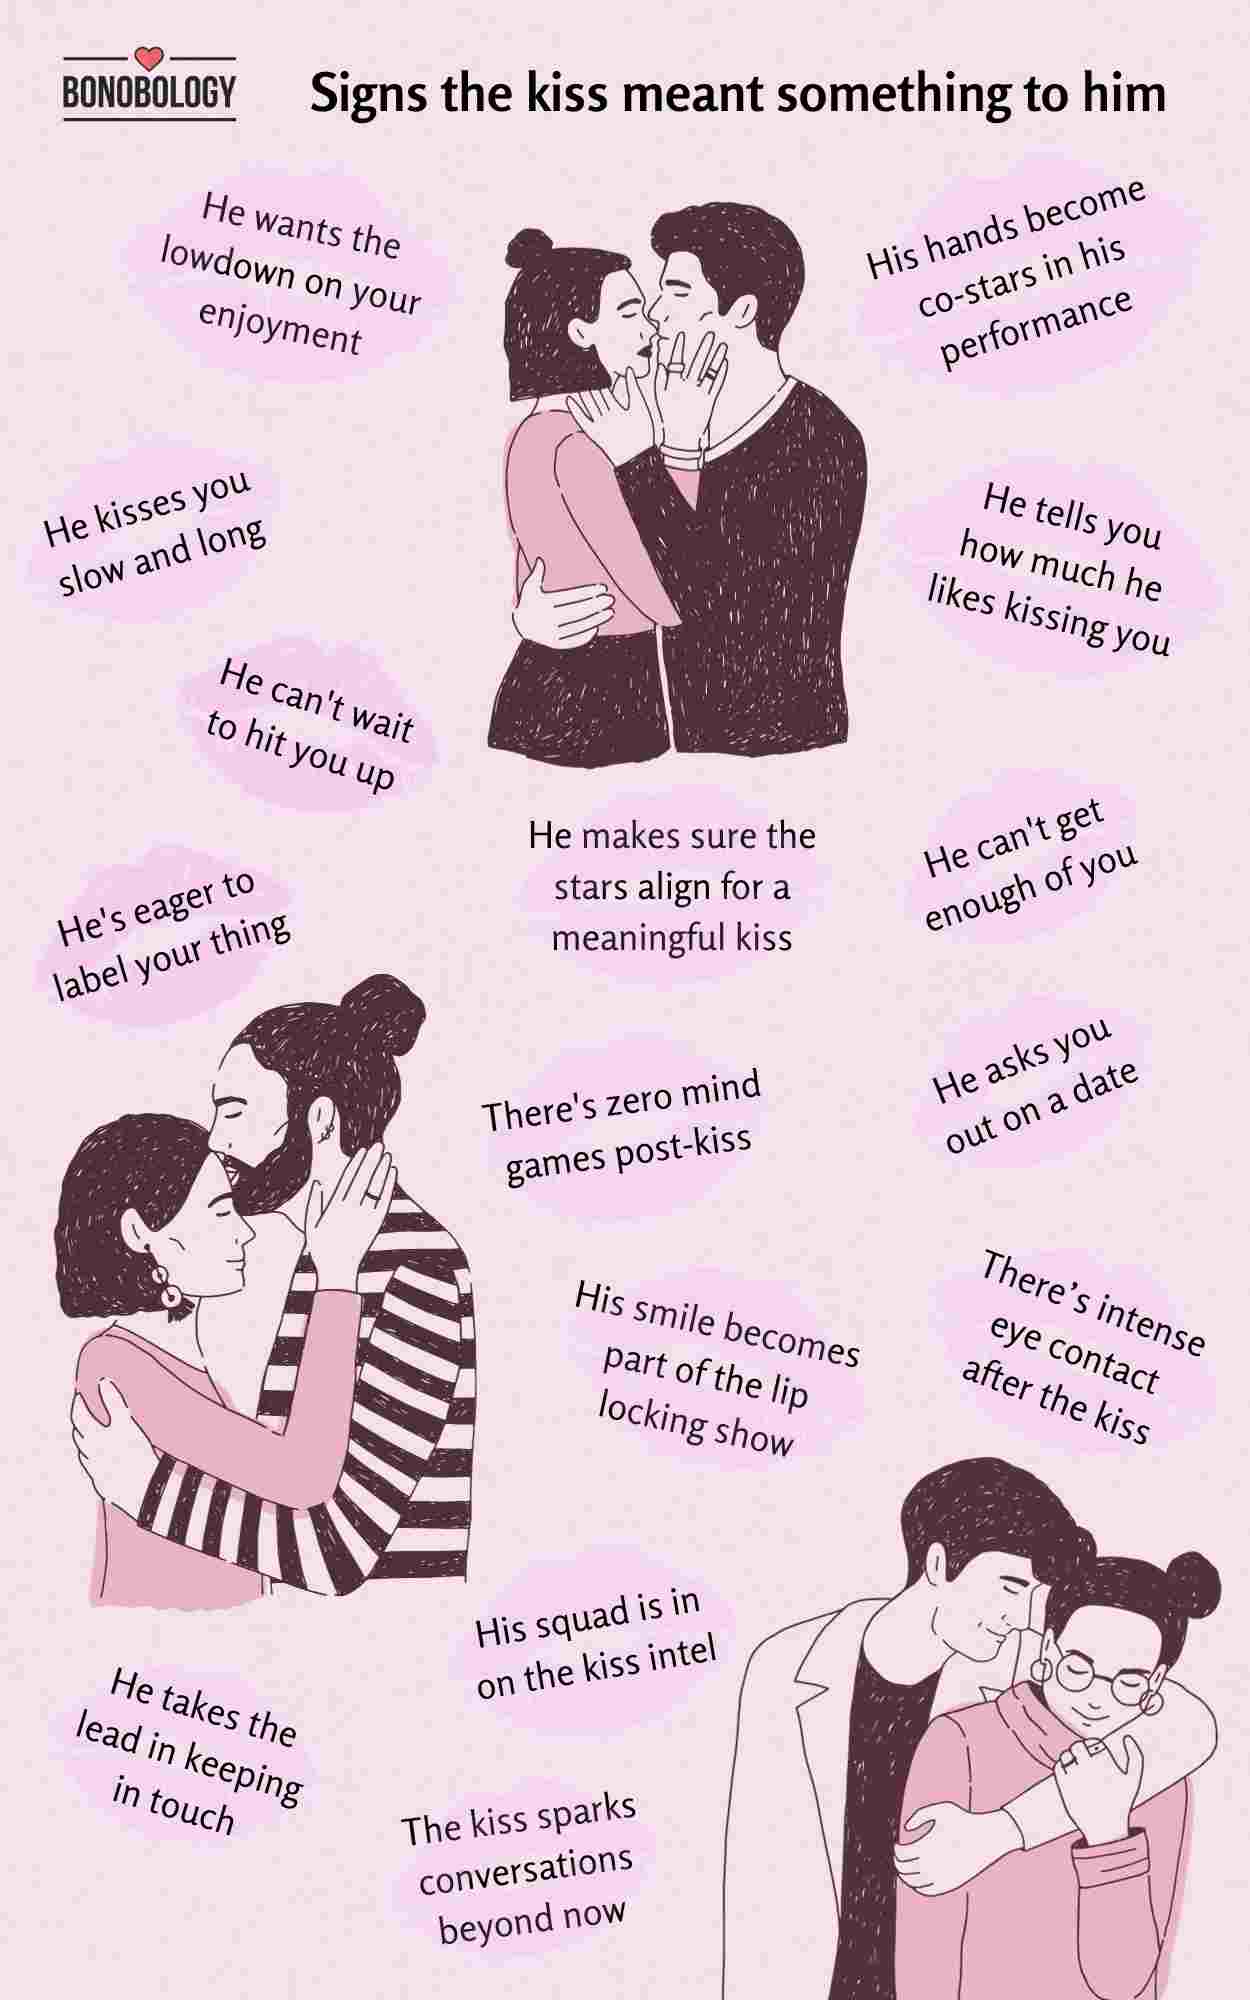 Infographic on Signs the kiss meant something to him